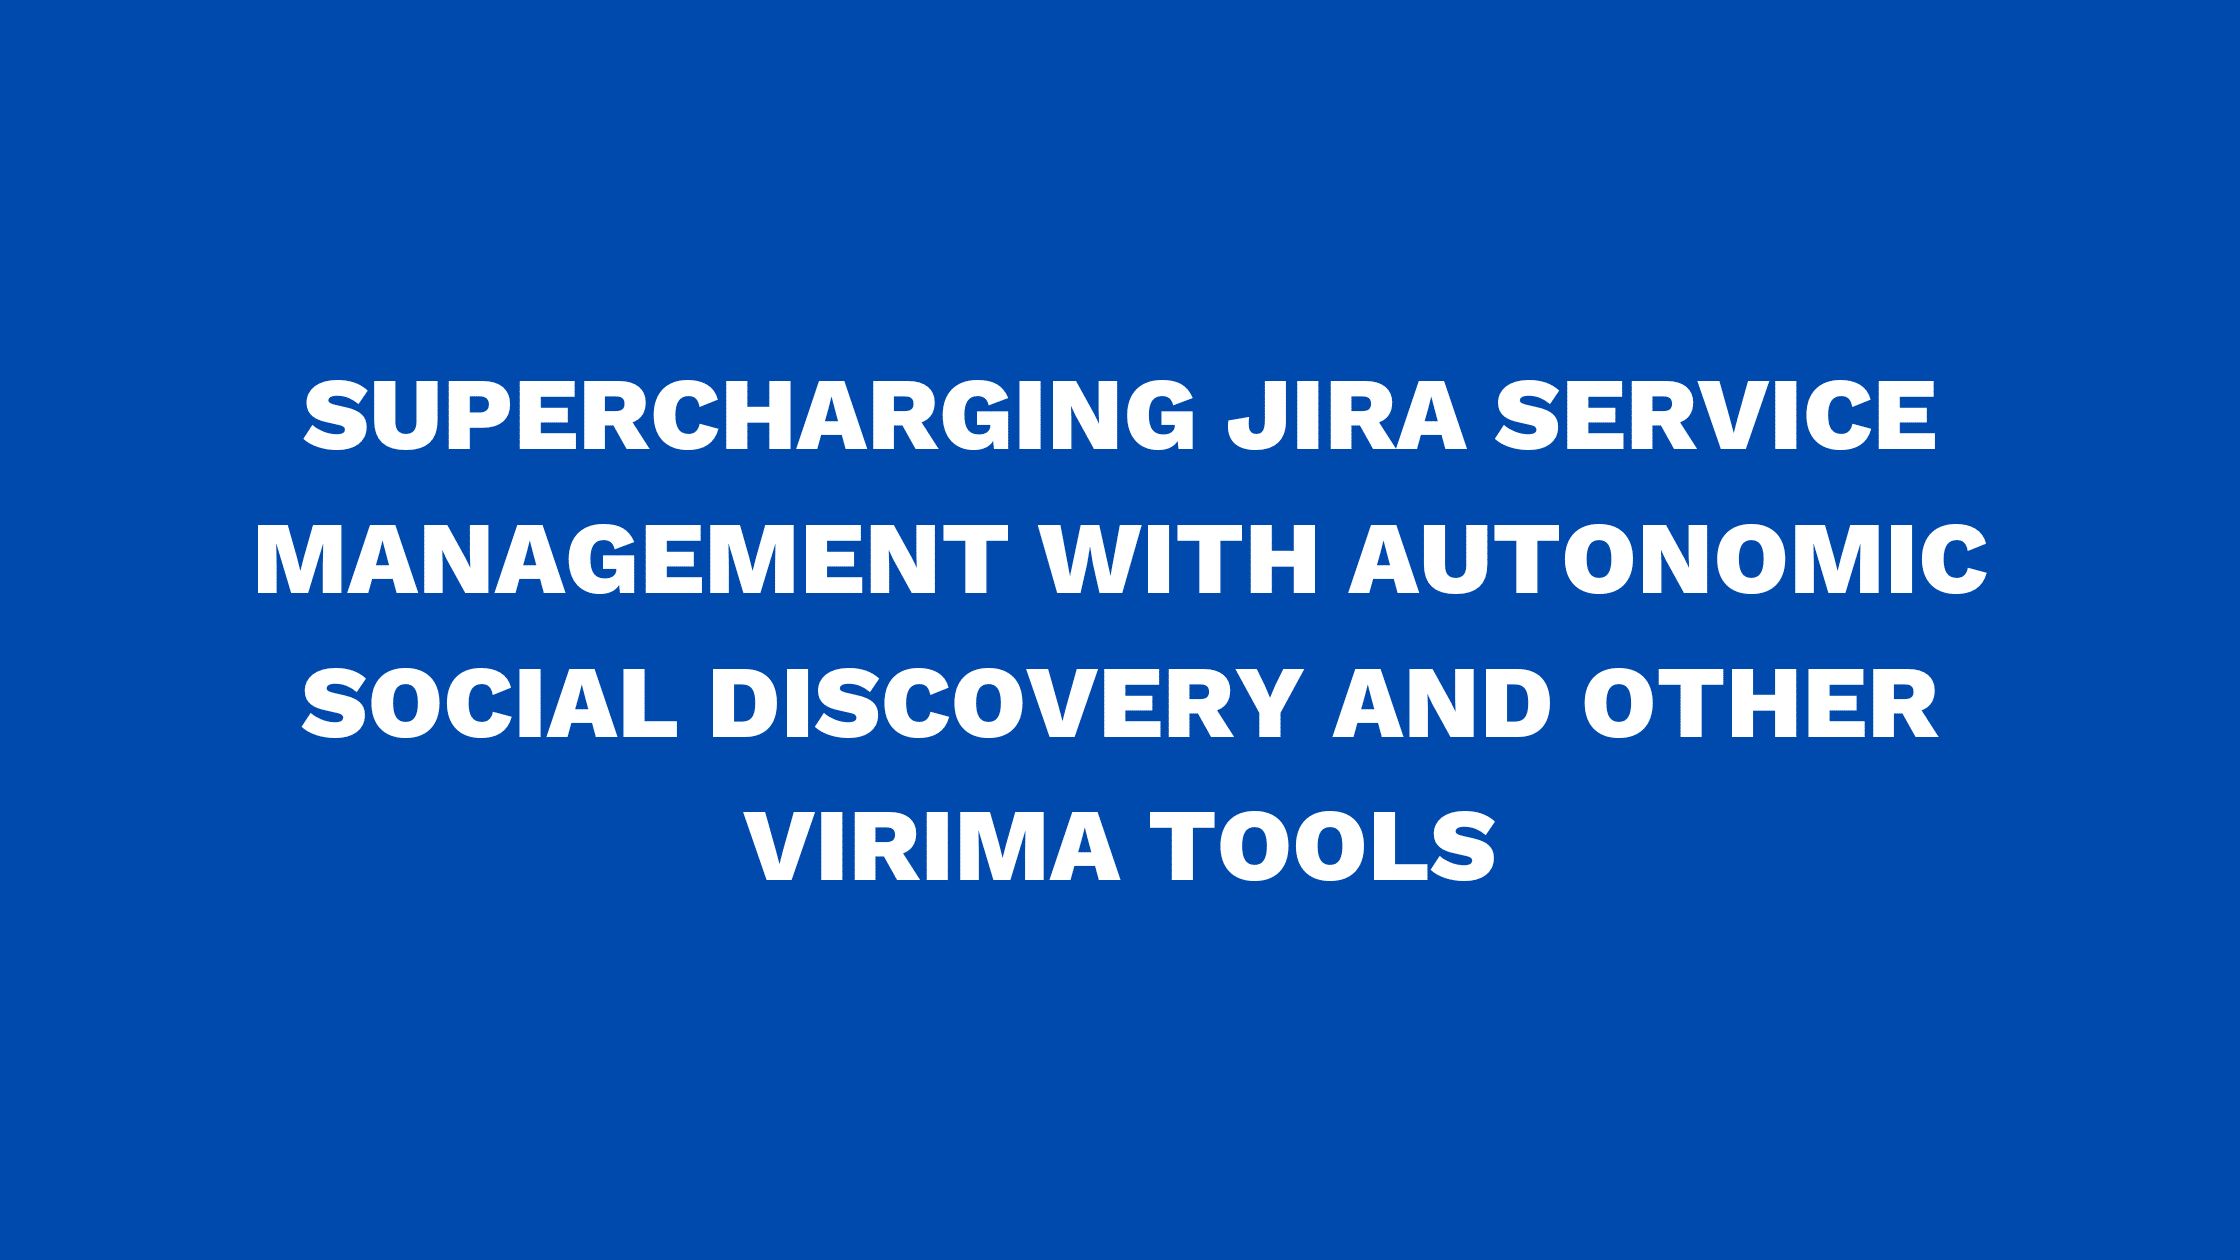 Supercharging Jira Service Management with Autonomic Social Discovery and other Virima tools